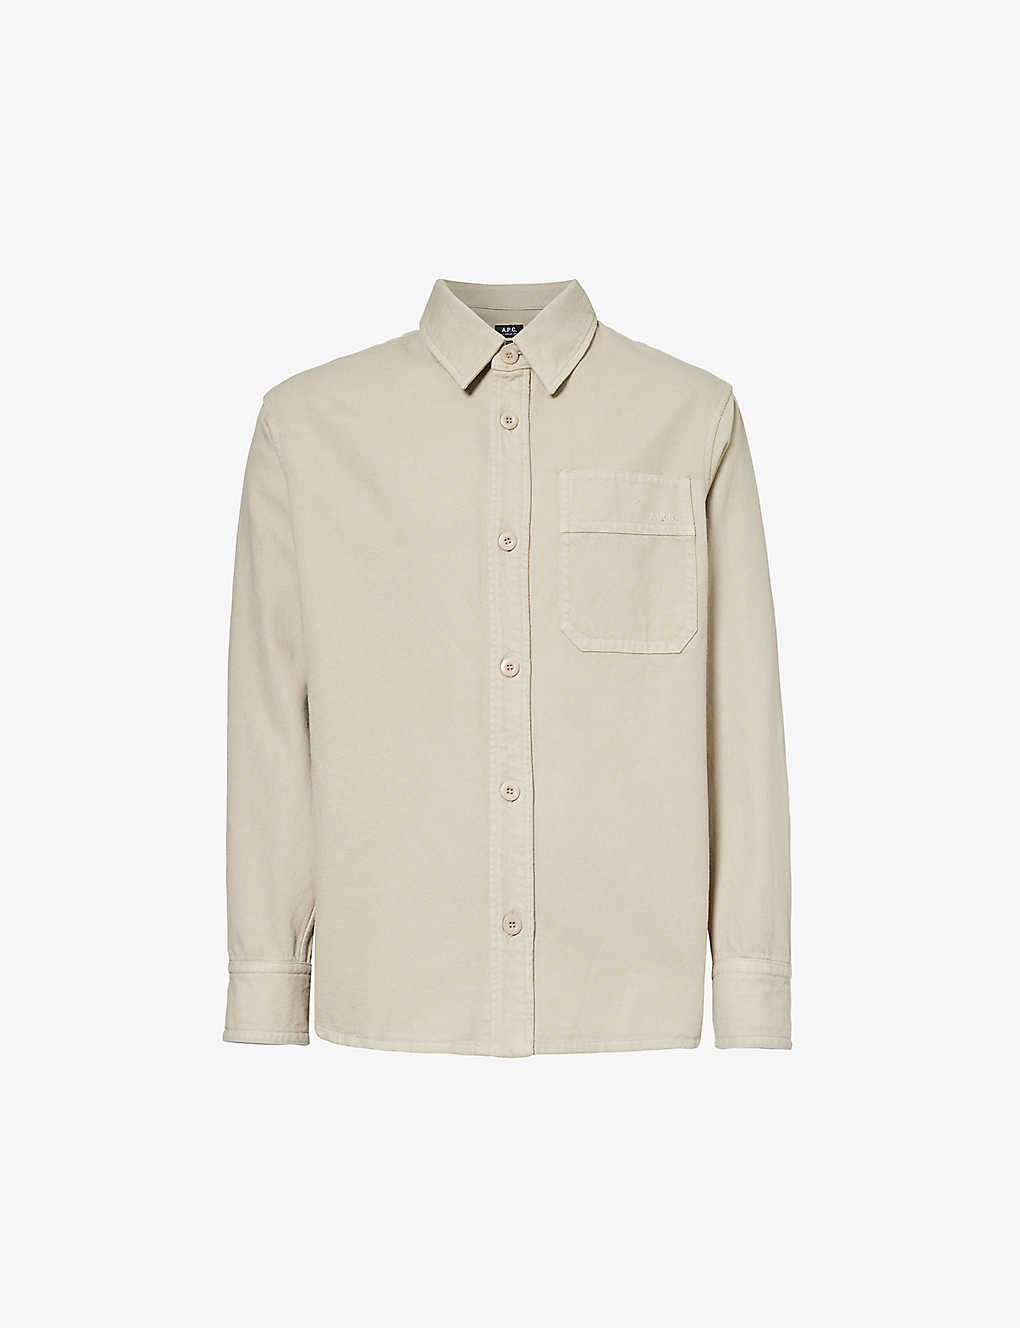 Apc Mens Taupe Long-sleeved Chest-pocket Cotton Shirt